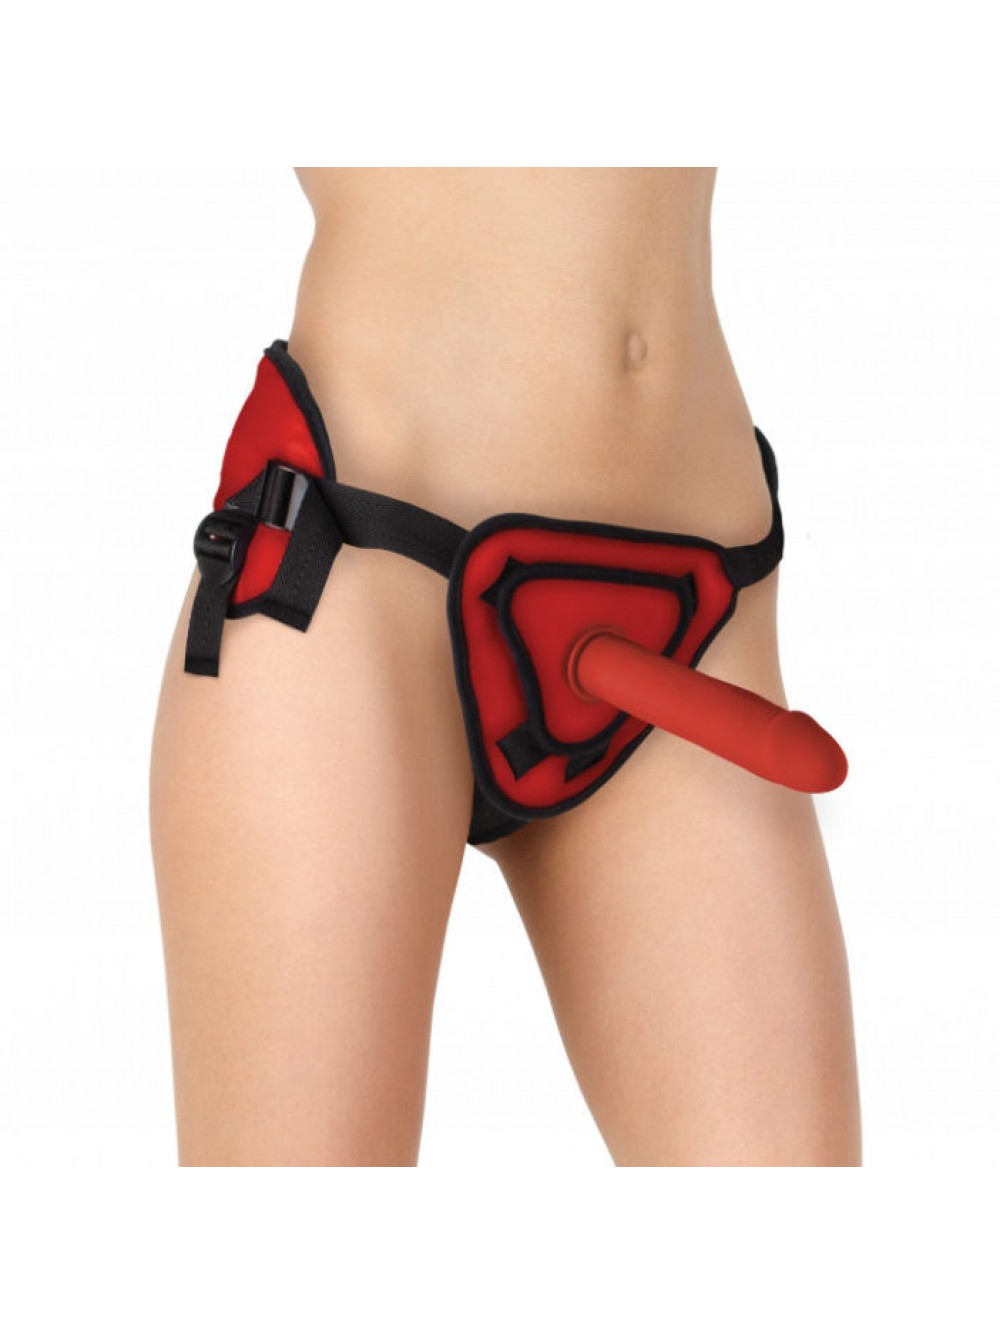 OUCH DELUXE STRAP ON SILICONE DELUXE RED  25.5 CM 8714273301659